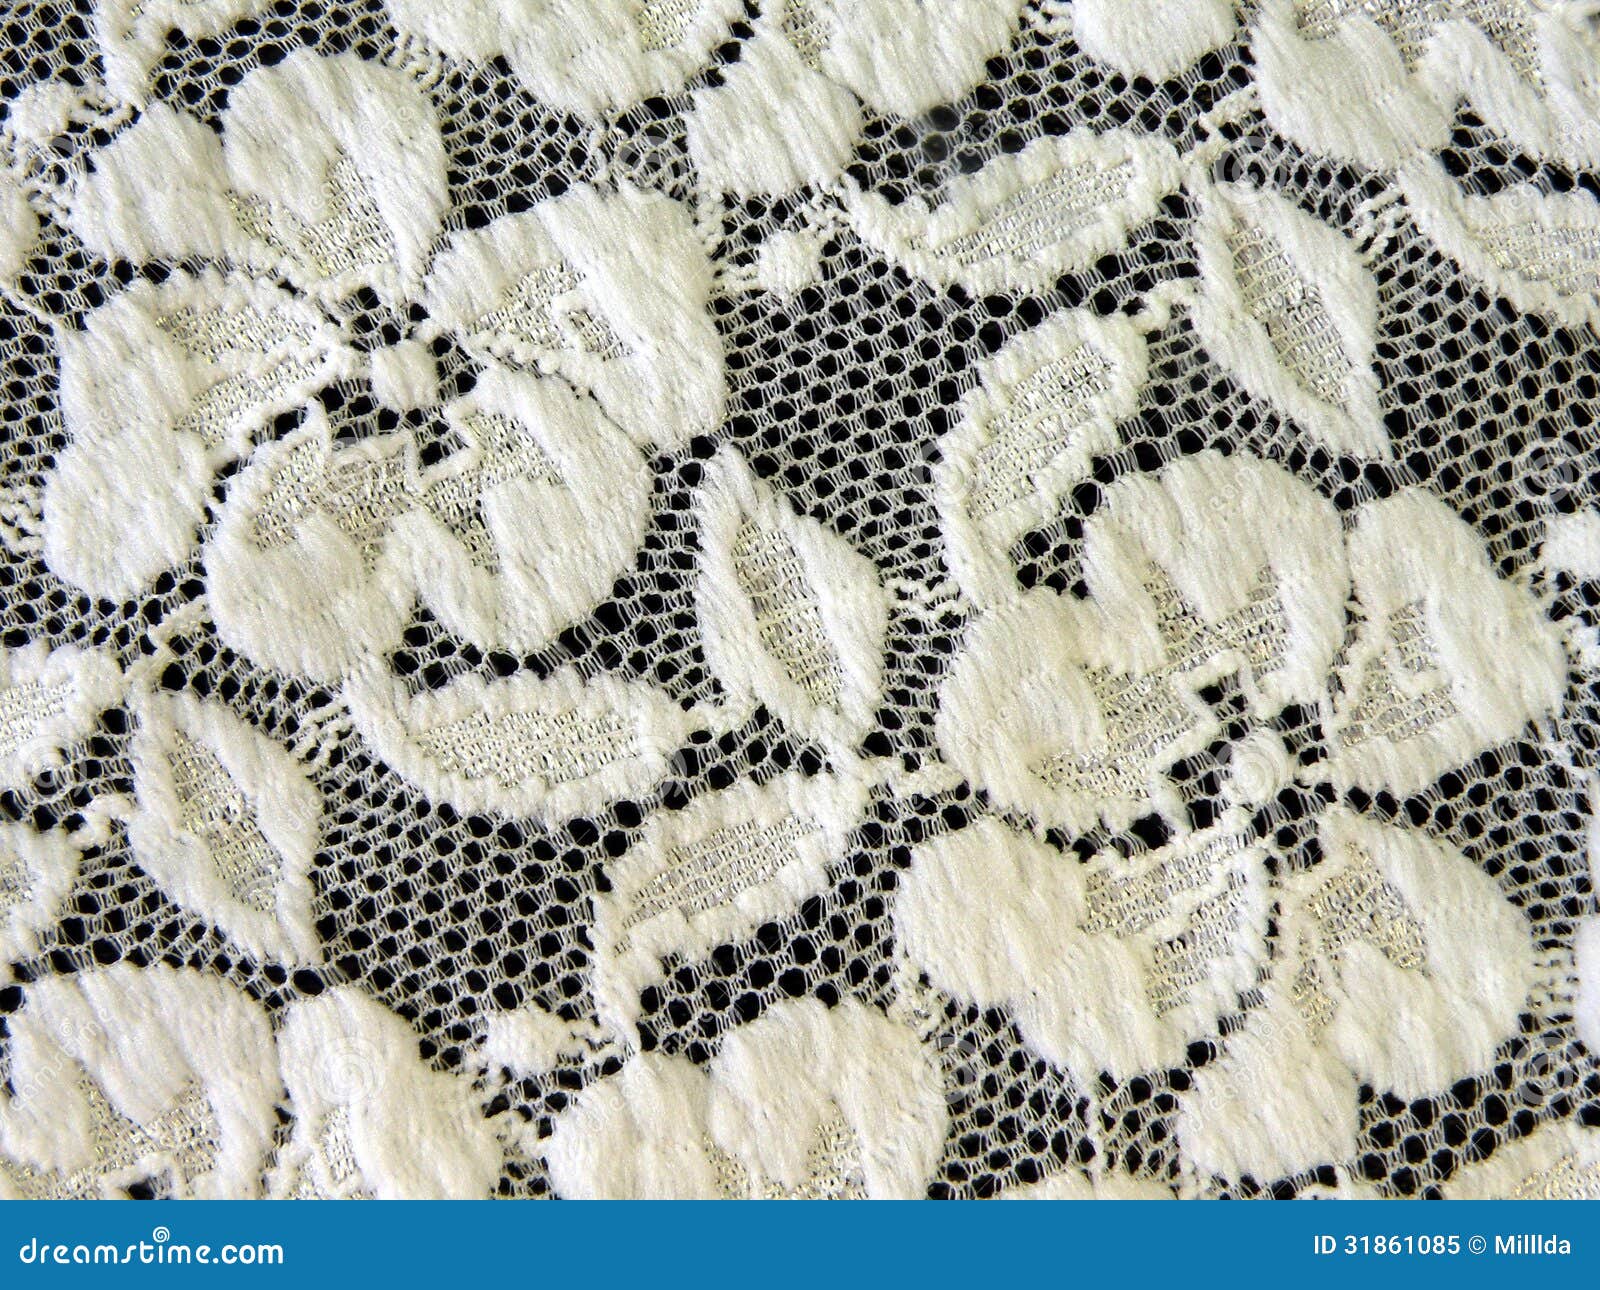 White lace fabric texture suitable as background